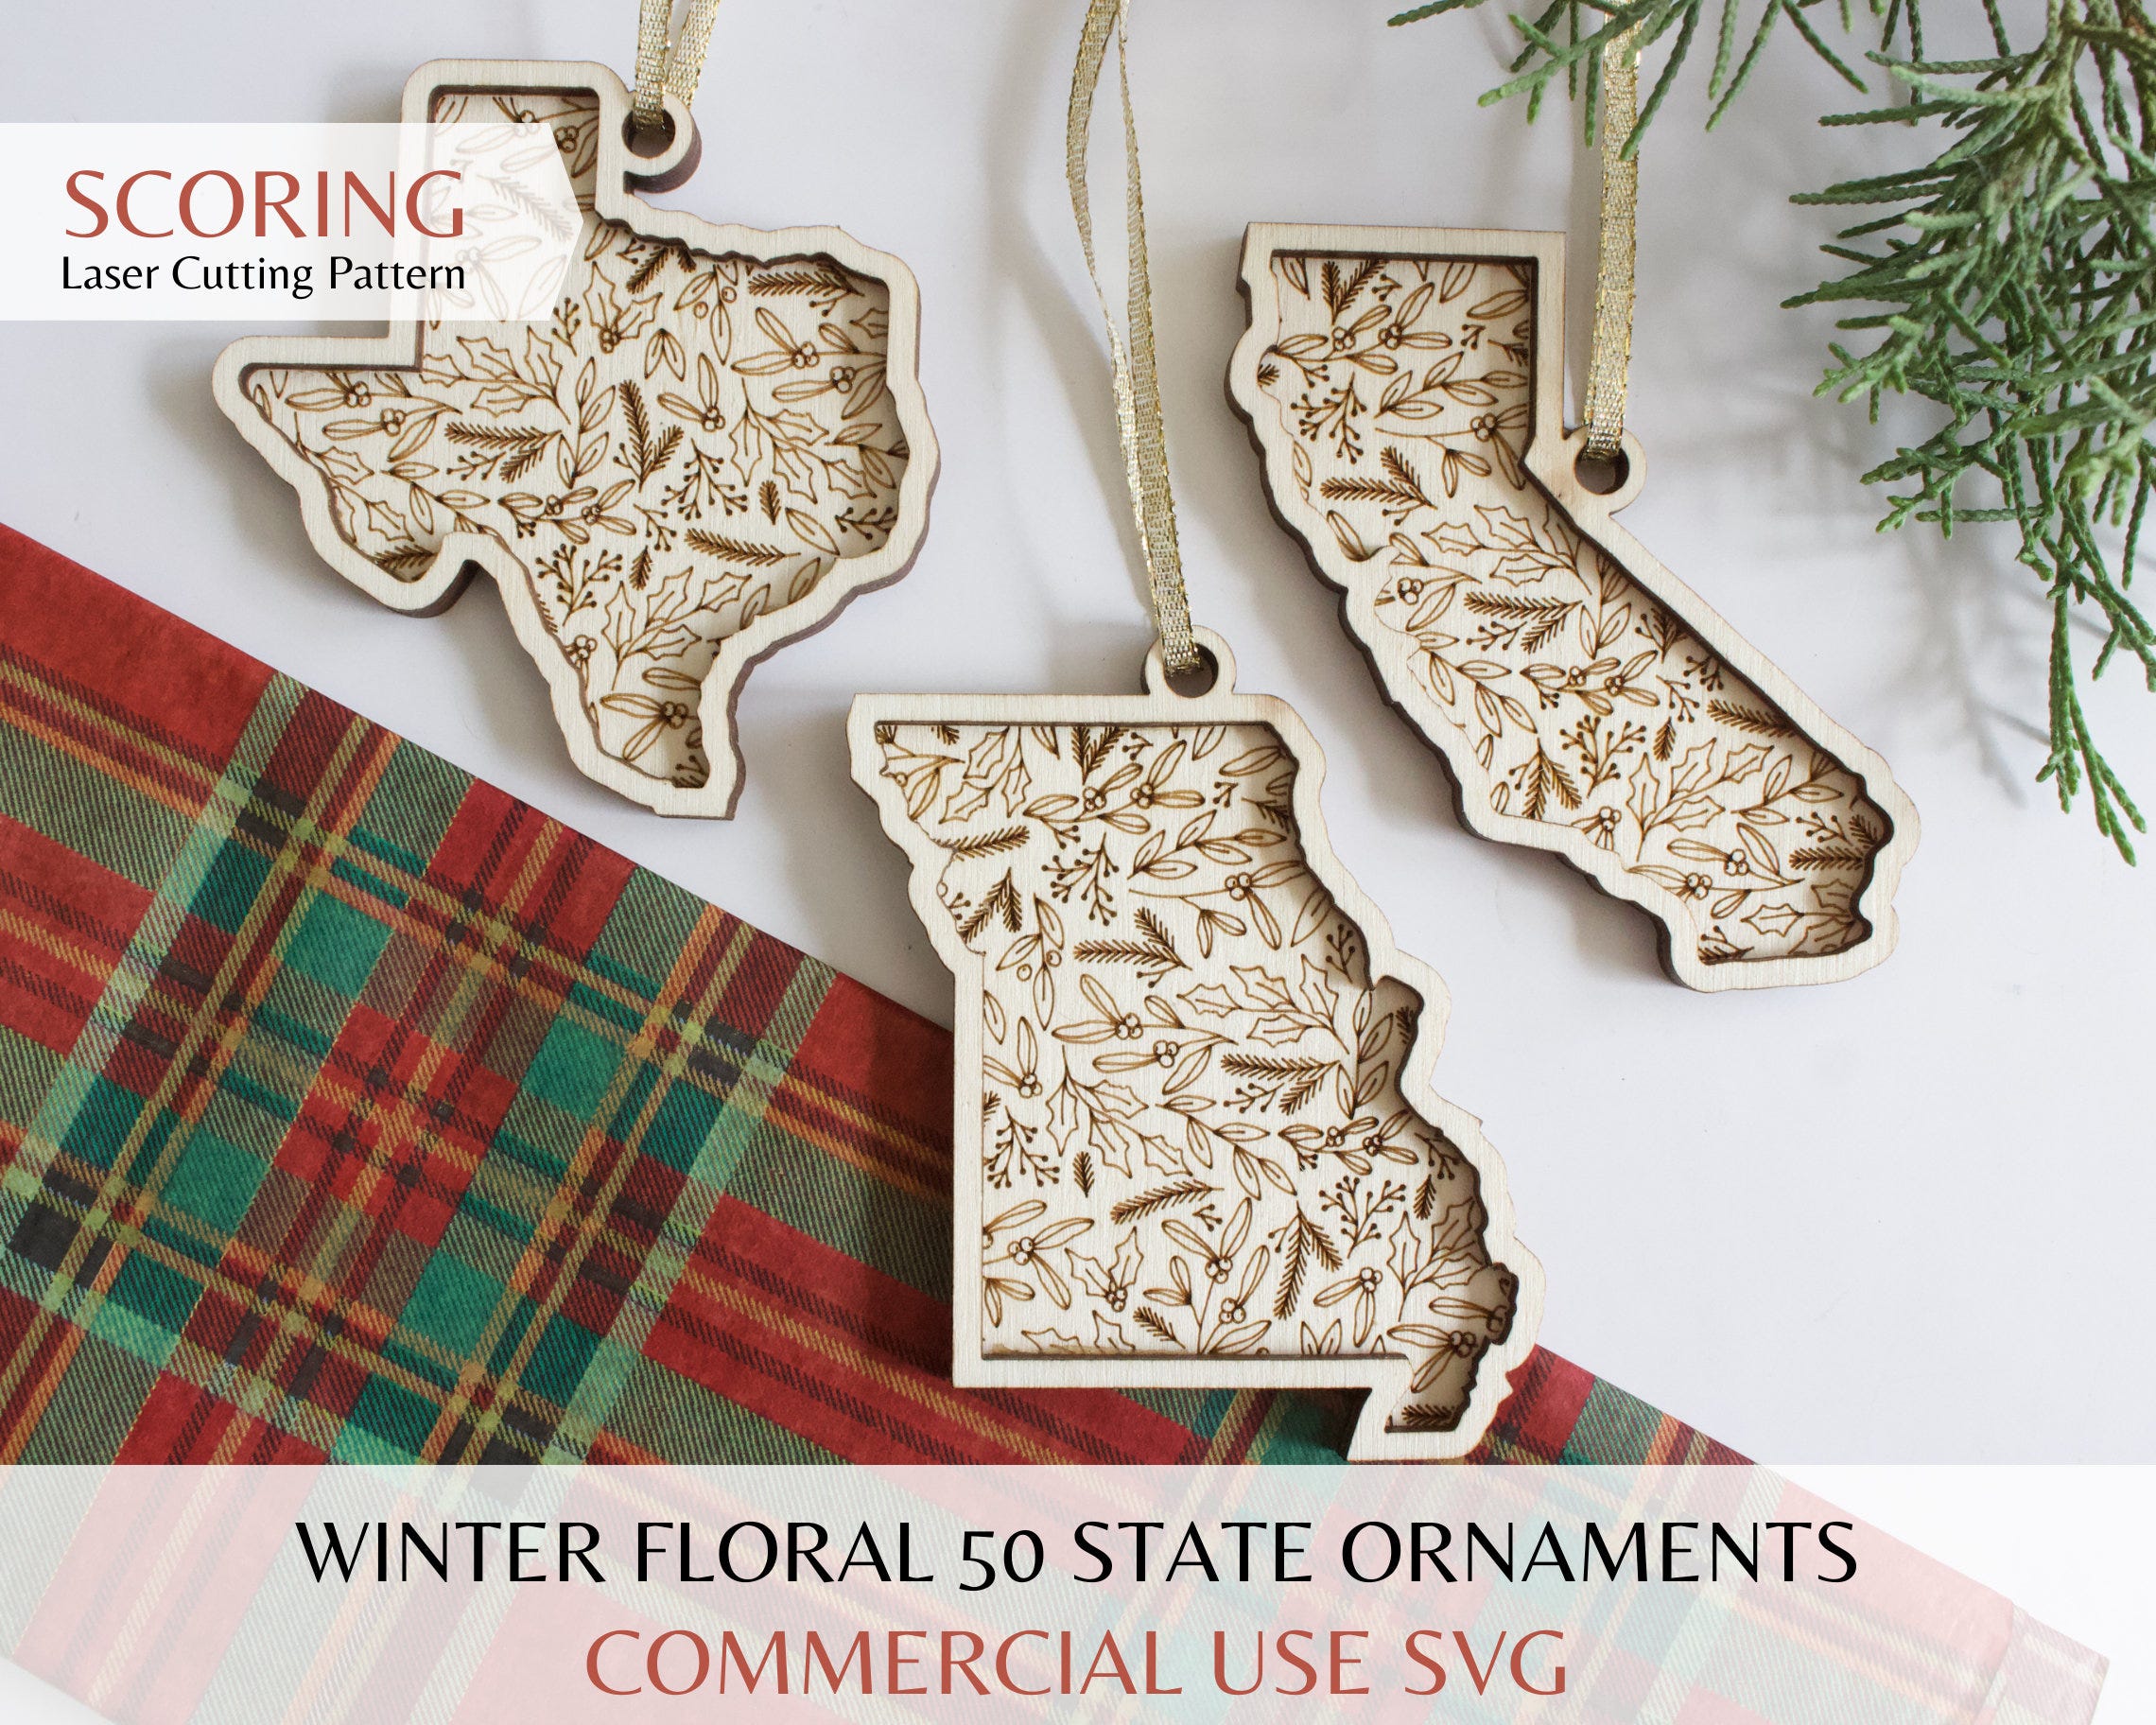 SCORING Winter Floral 50 USA States Ornaments SVG Files | Glowforge Laser Cutting Wood | Christmas Holiday Present Stocking Cut Pattern